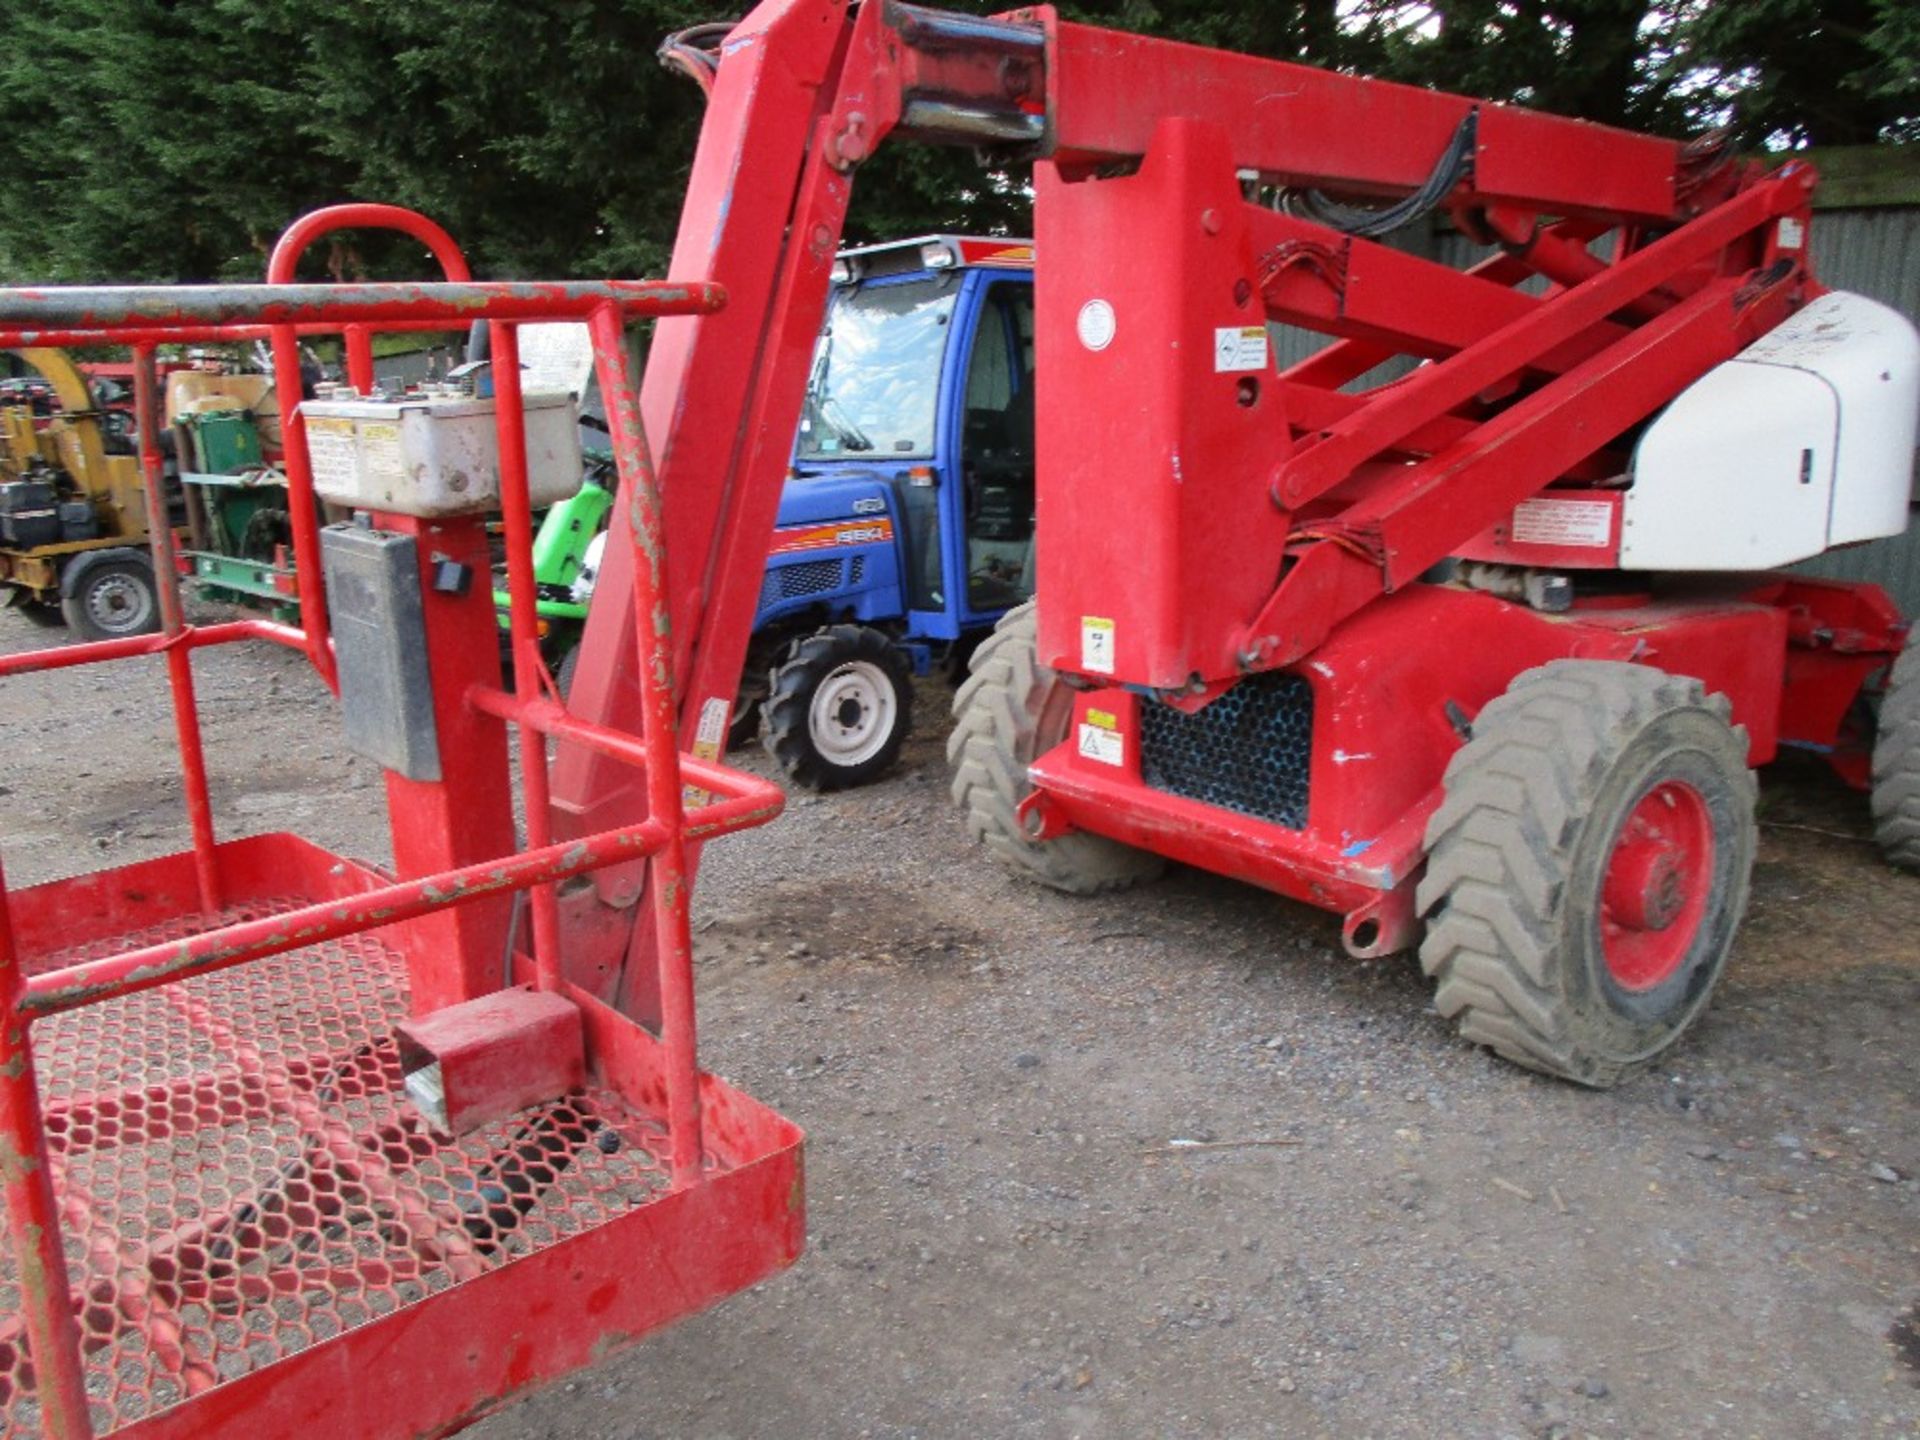 UPRIGHT AB-46 RT DIESEL POWERED 4 WHEEL DRIVE BOOM ACCESS UNIT - Image 7 of 7